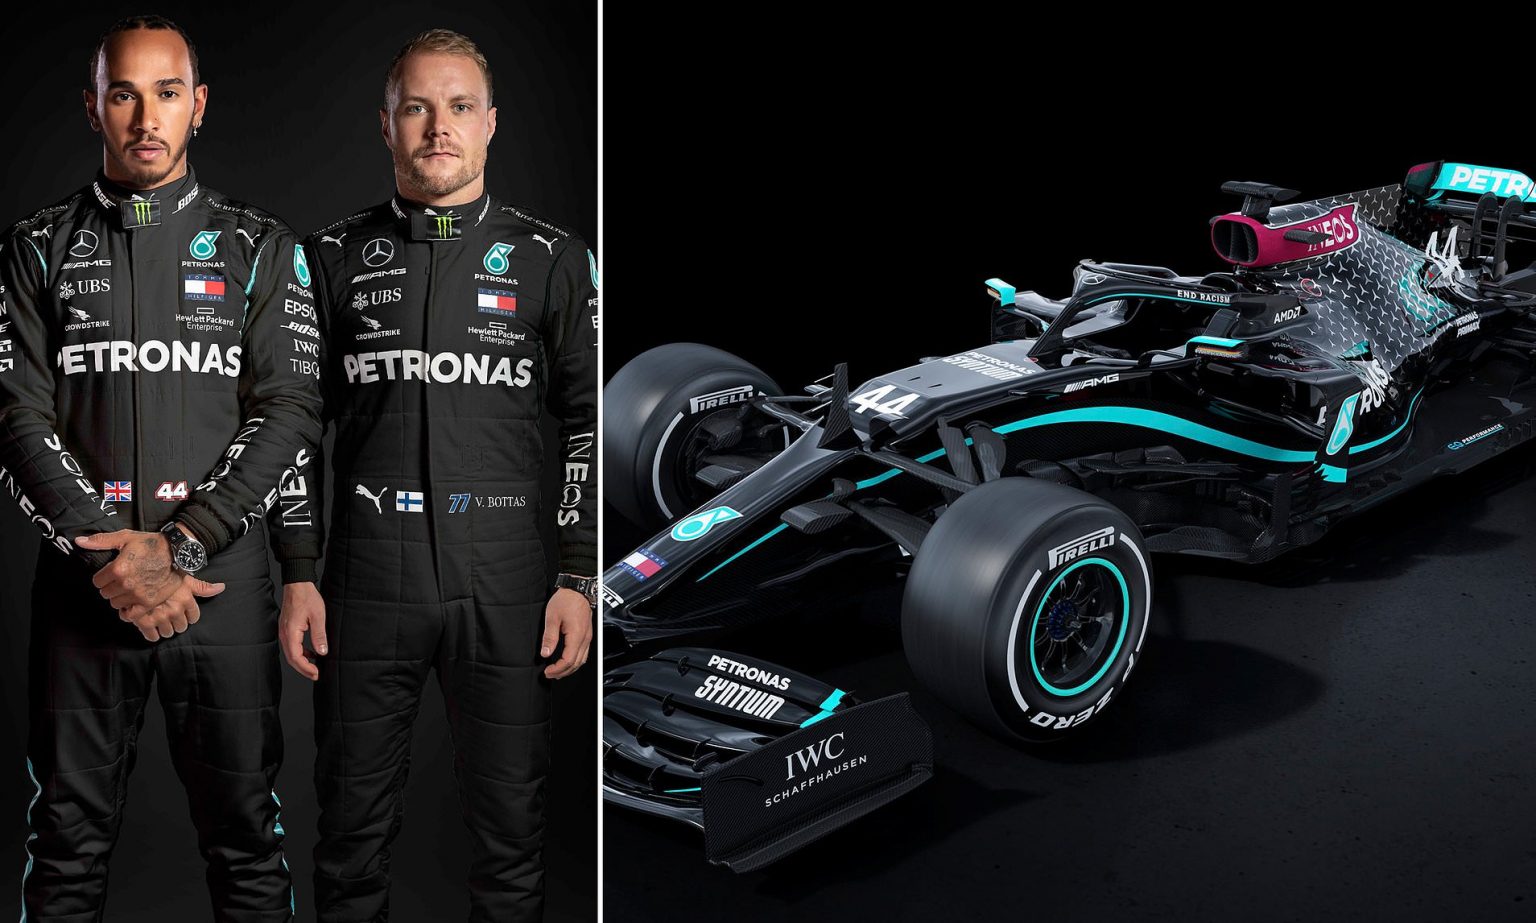 ...at the technical specifications of the new Mercedes F1 W10 EQ Power+ car...